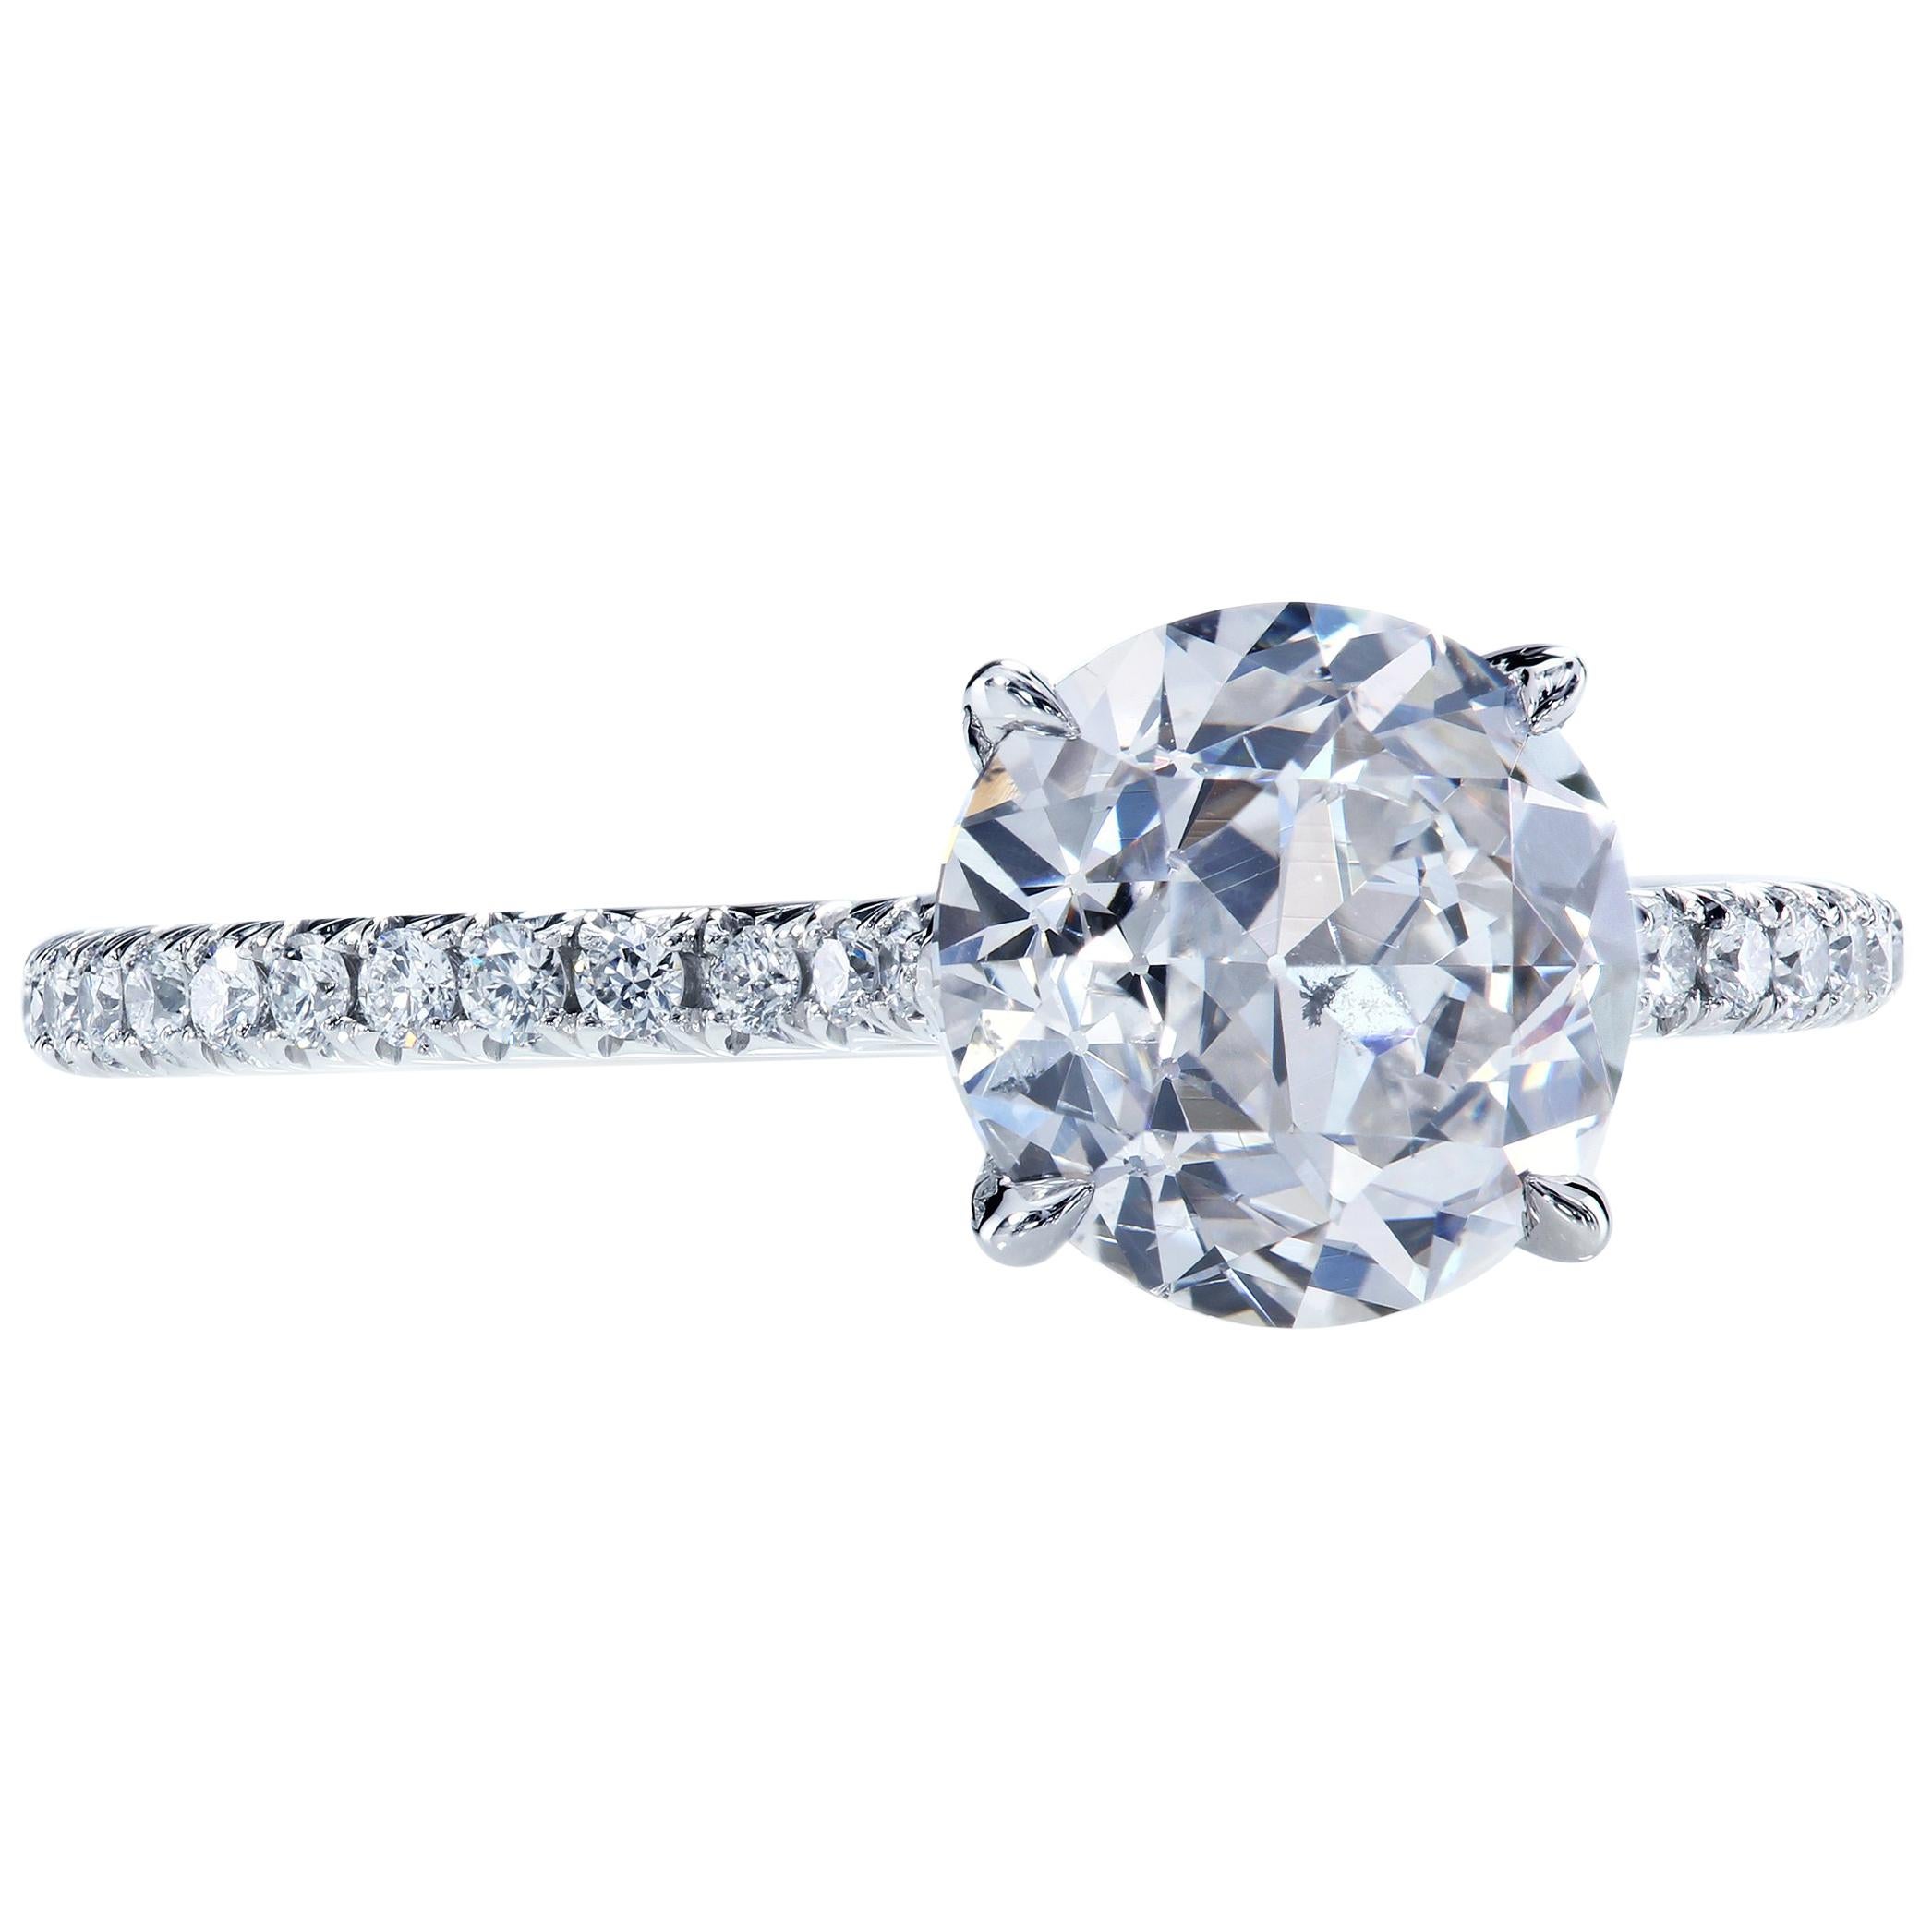 Chic solitaire with a mesmerizing 1.66-carat Old European diamond on micro pave shank, so thin and delicate the stone seems to float in the thin air. The single claw prongs securely hold the stone without blocking its majestic beauty.

Finger size: